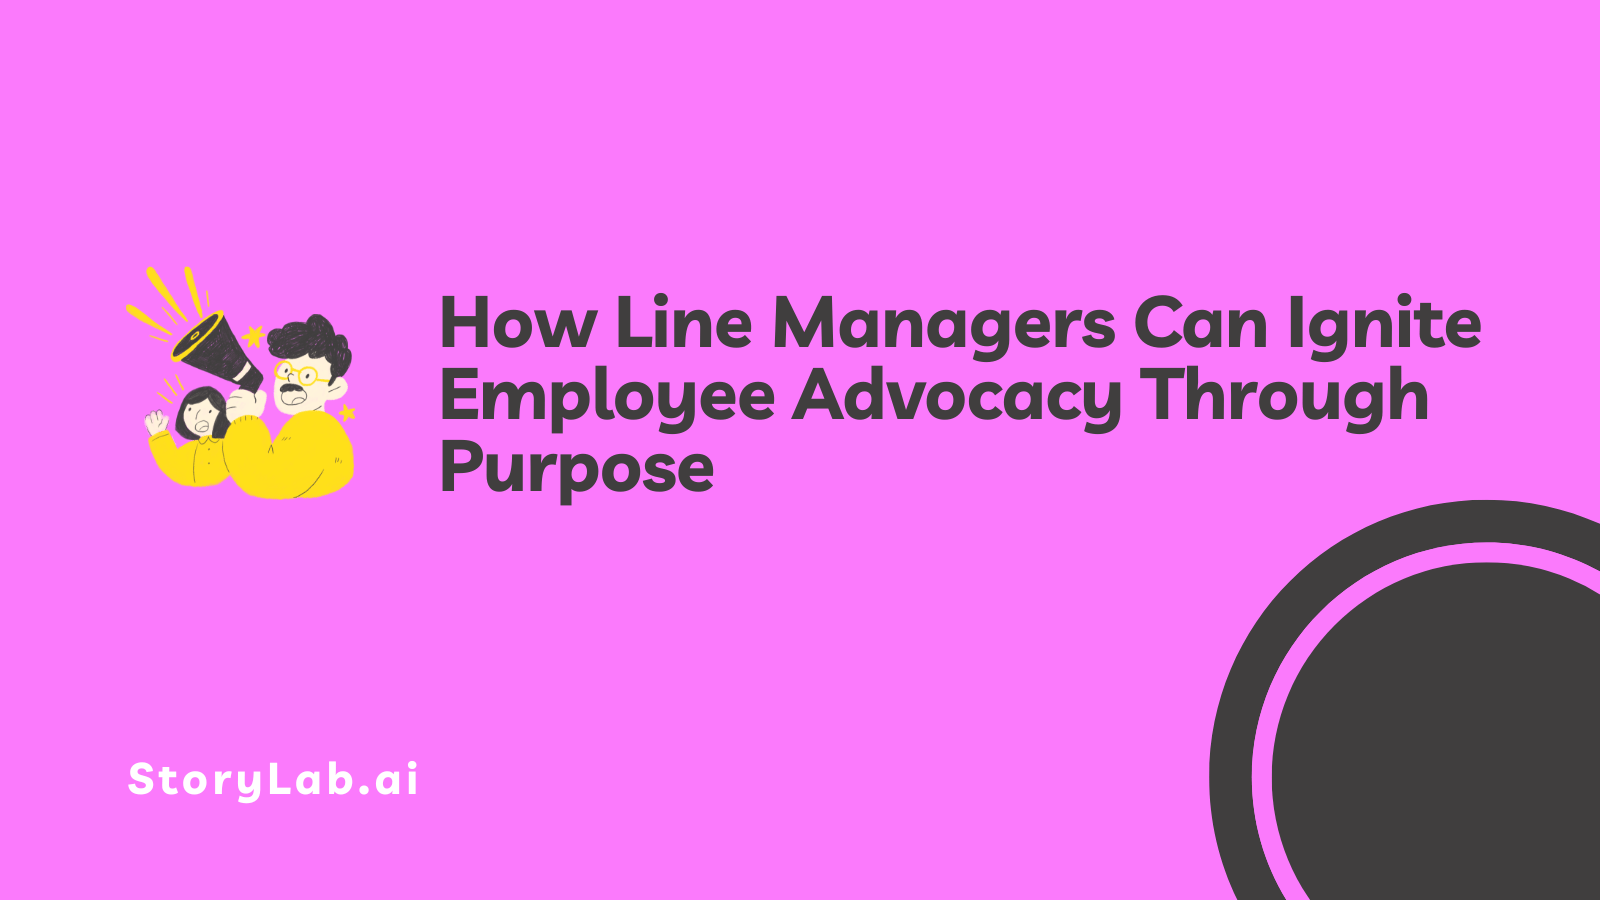 How Line Managers Can Ignite Employee Advocacy Through Purpose